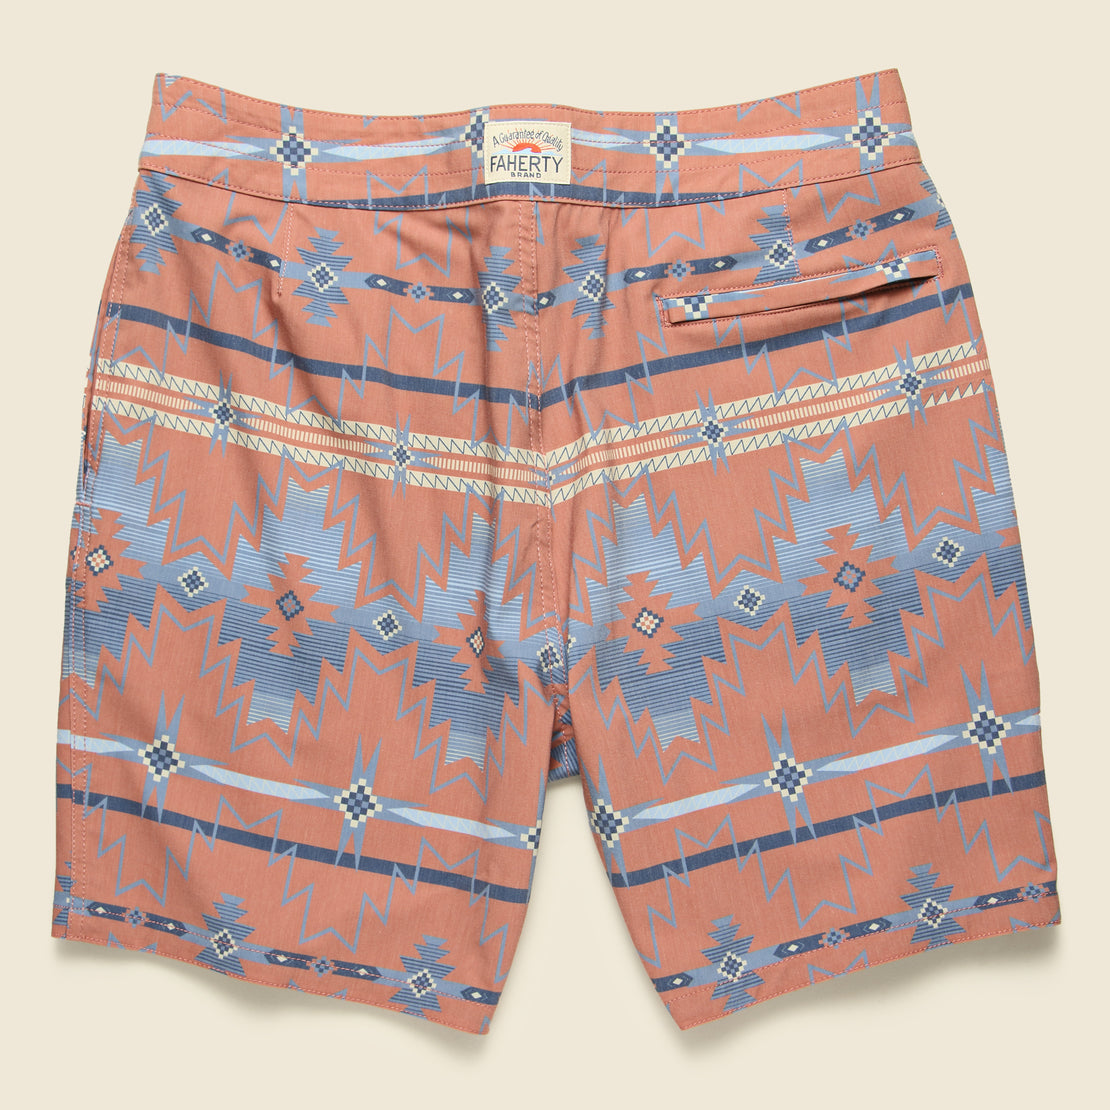 Classic 7-inch Boardshort - Rose Morning Star - Faherty - STAG Provisions - Shorts - Swim